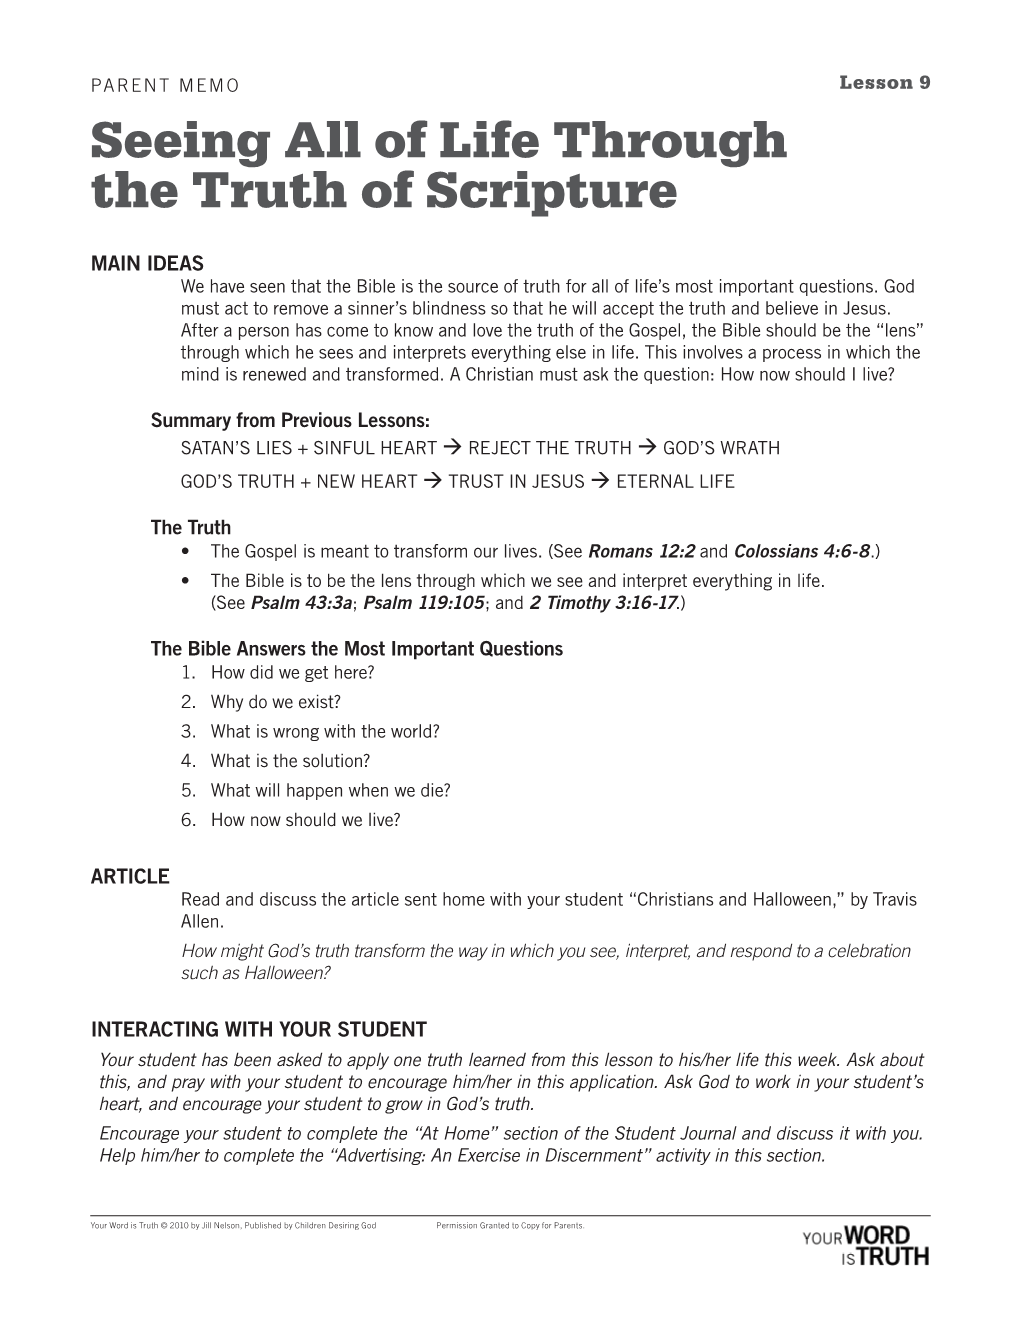 Seeing All of Life Through the Truth of Scripture